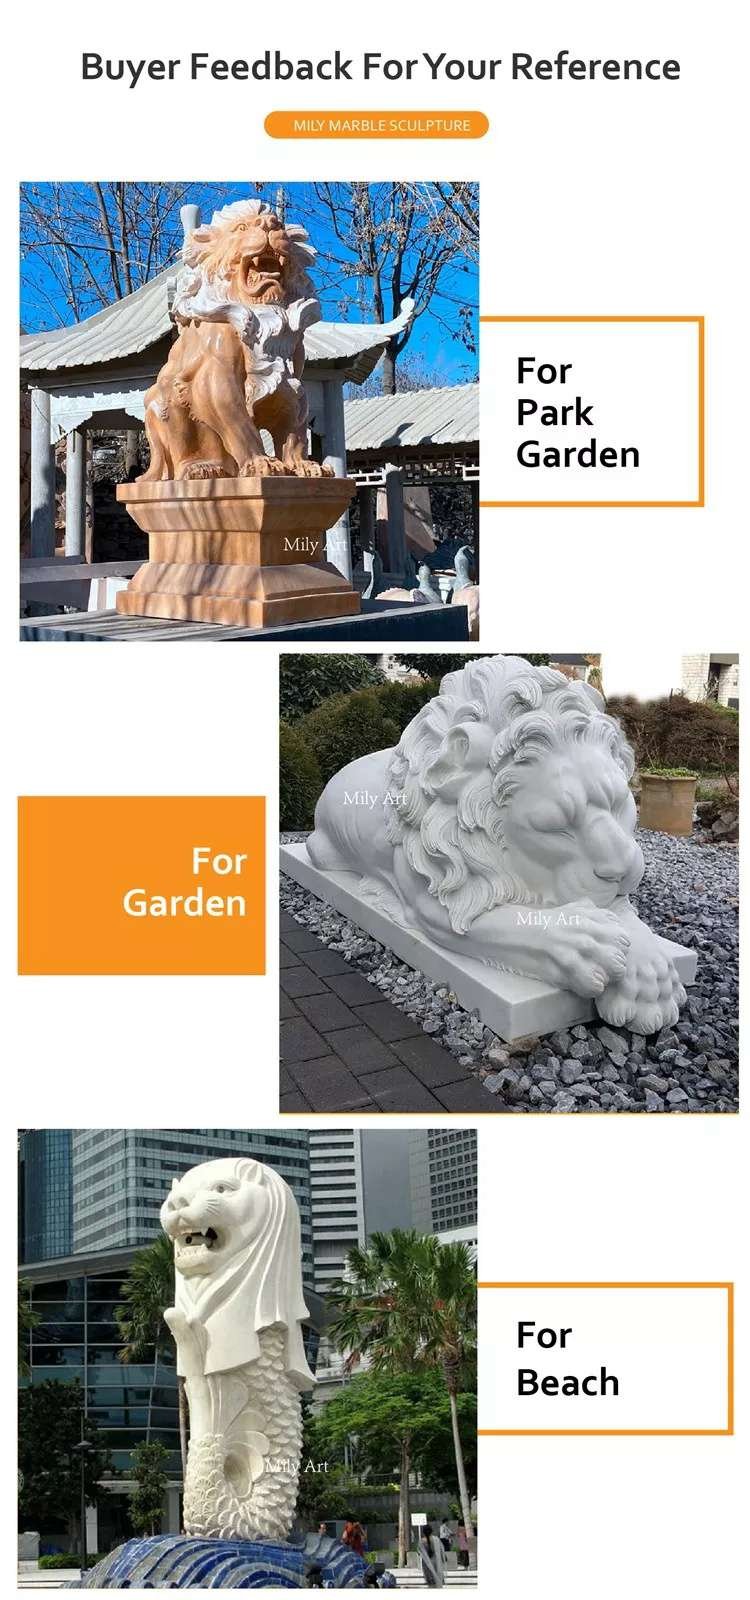 4.1feedback of marble lion statue mily sculpture